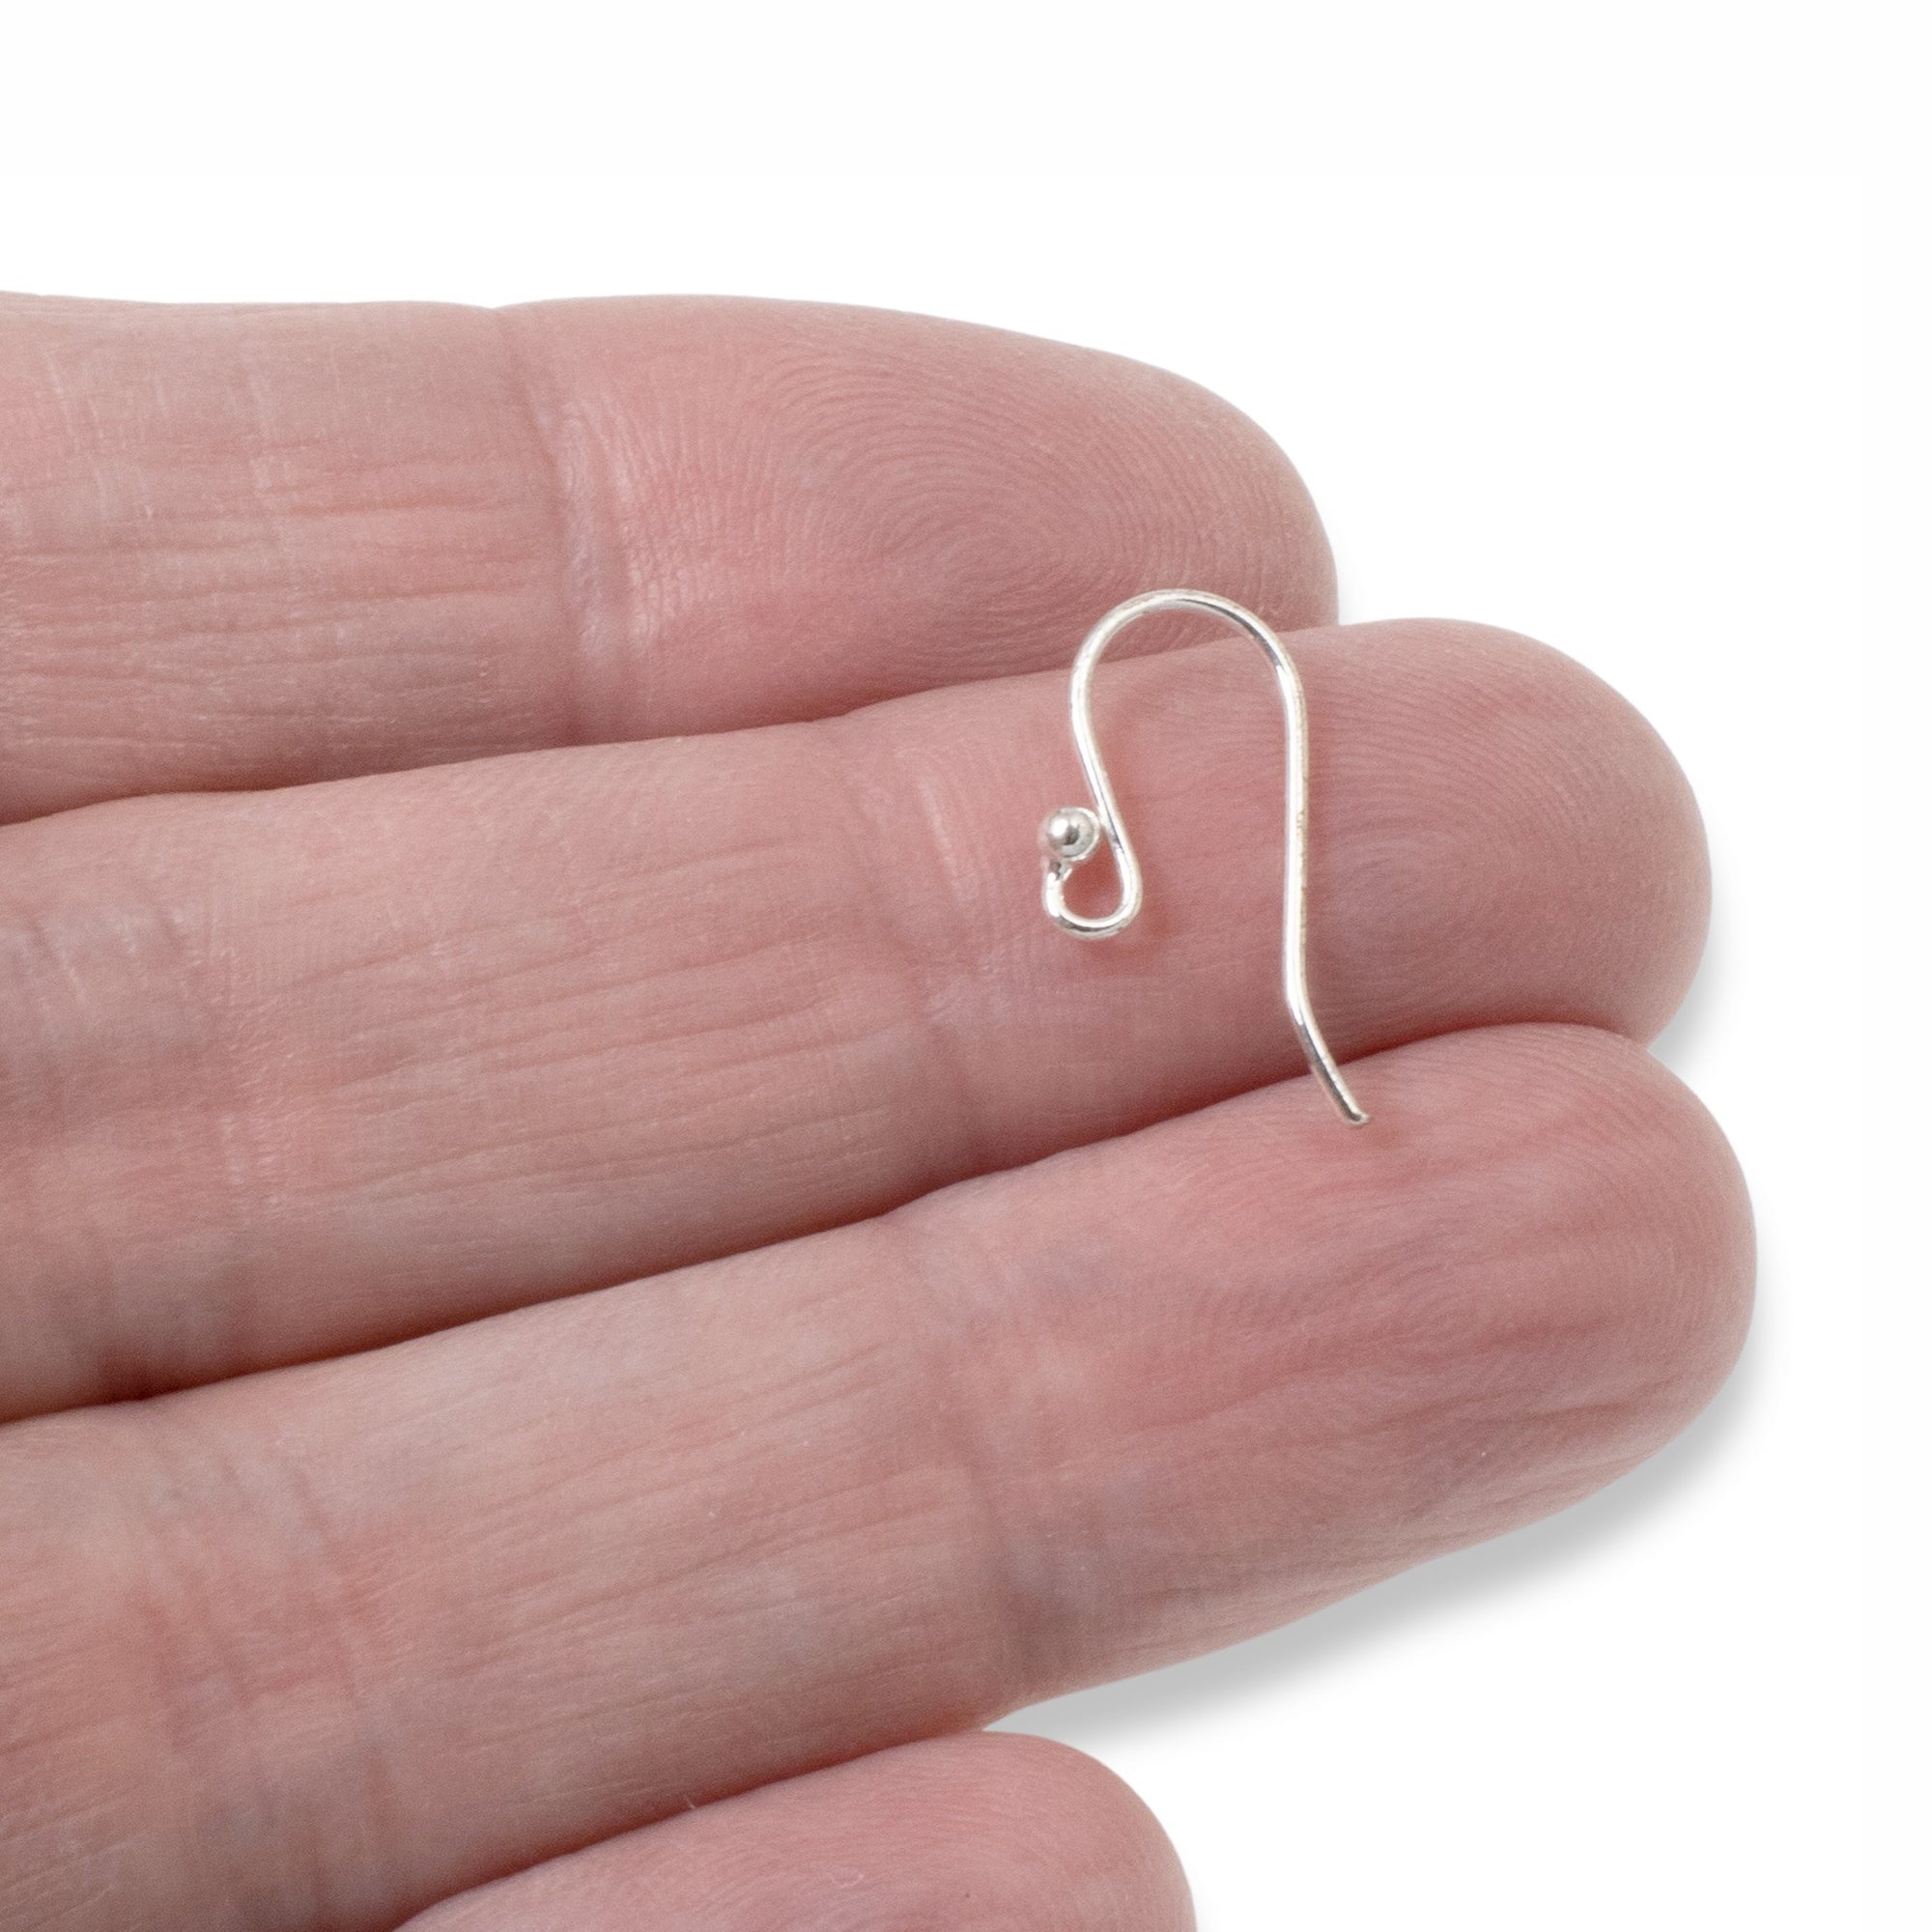 Plain Fish Hook Earwire with Ball, Silver-Plated (36 Pieces)